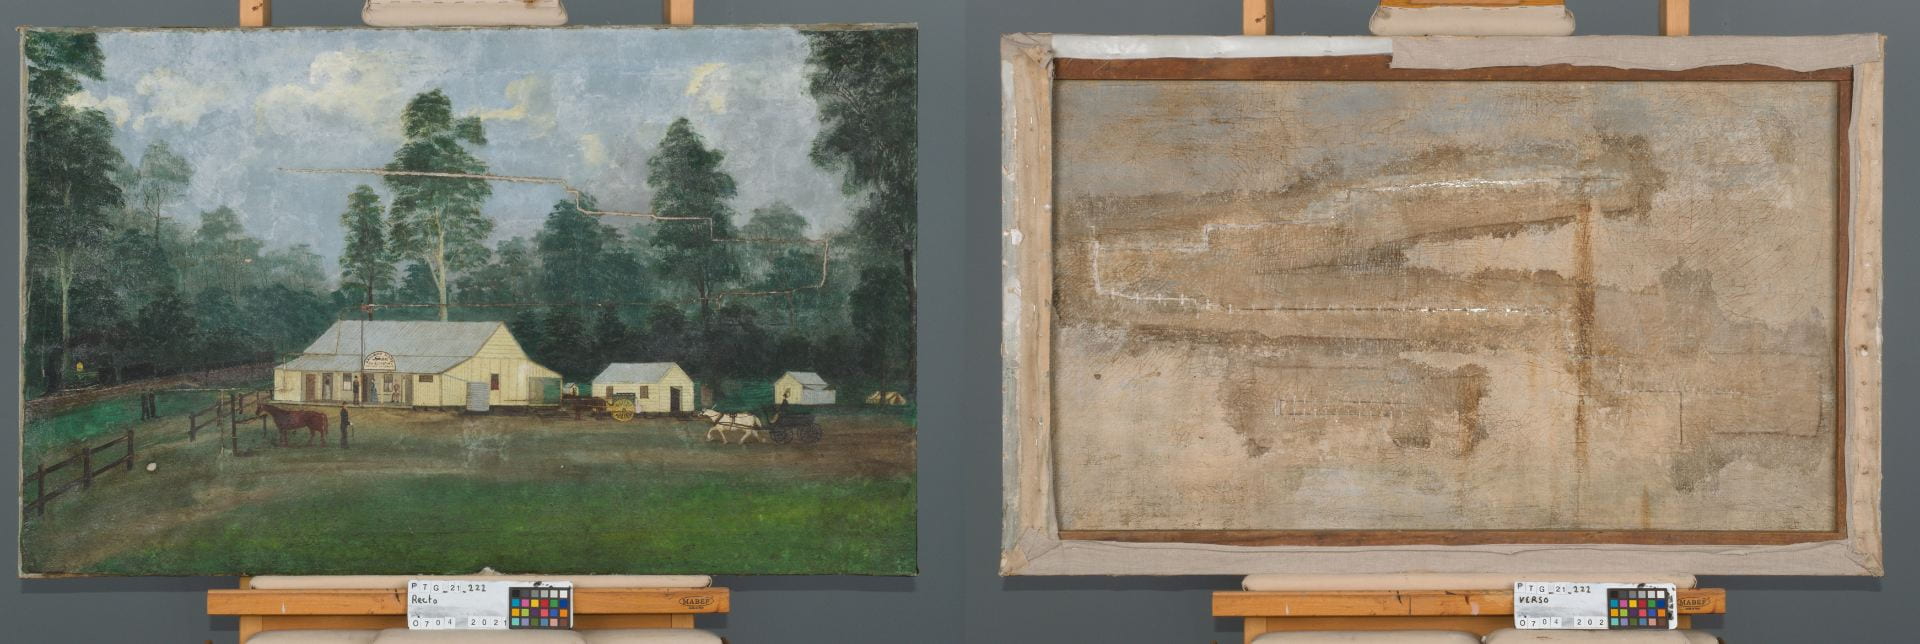 Two photos showing the front and back of a painting